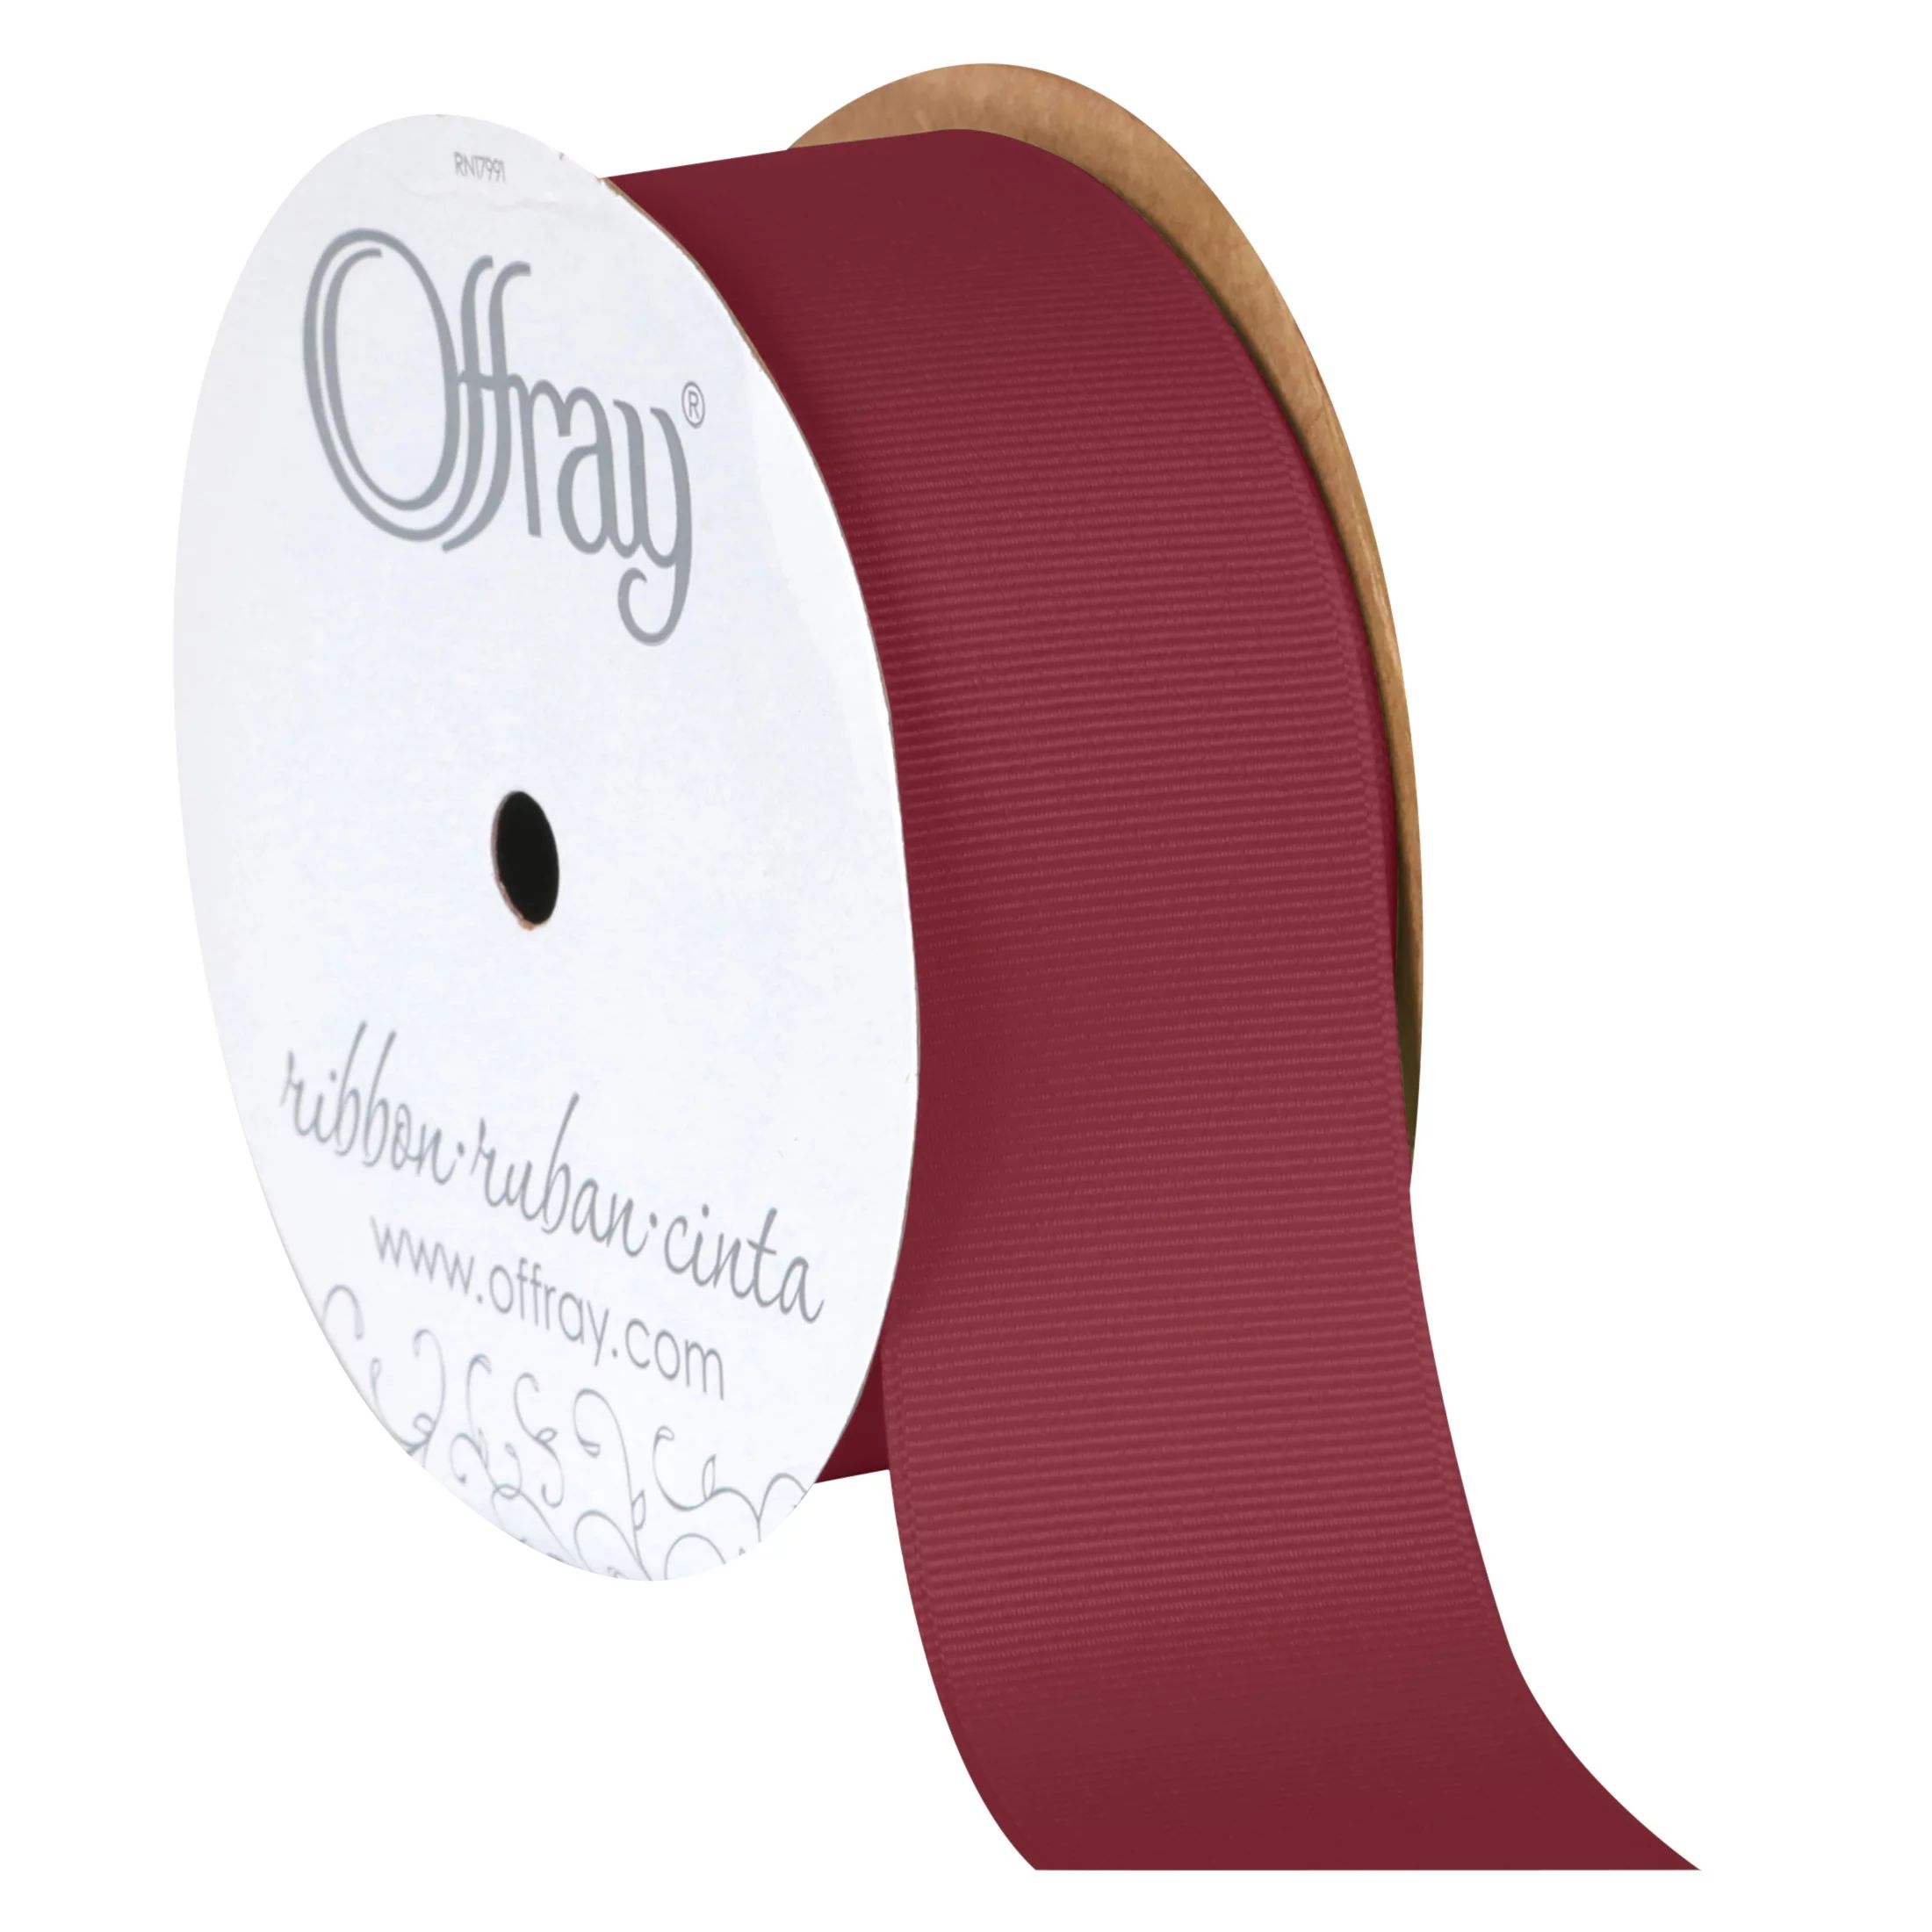 Offray Ribbon, Red Bordeaux 1 1/2 inch Grosgrain Polyester Ribbon for Sewing, Crafts, and Gifting... | Walmart (US)